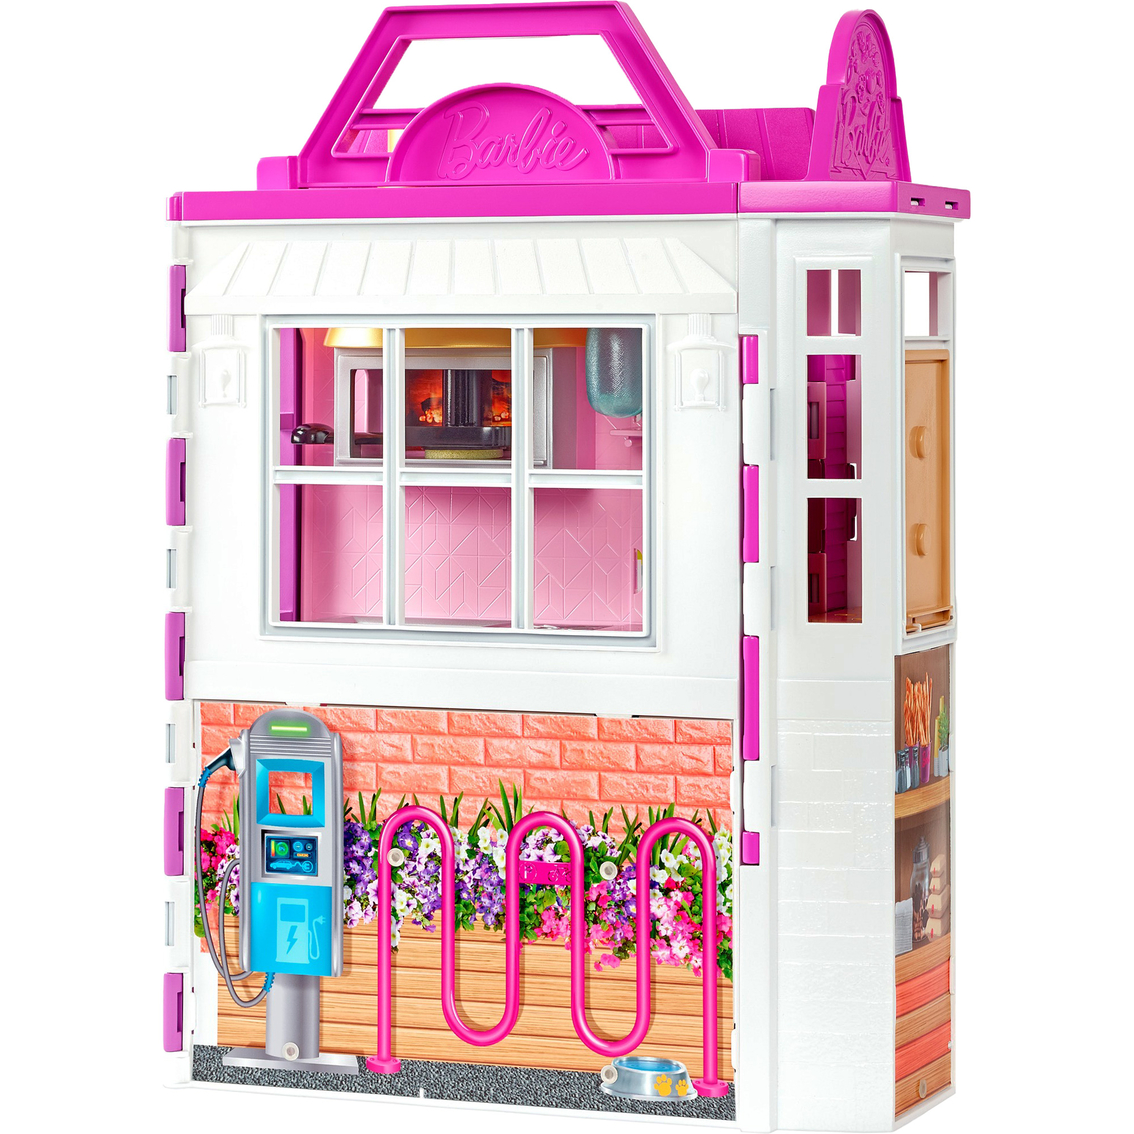 Barbie Cook 'n Grill Restaurant Doll & Playset - Image 3 of 4